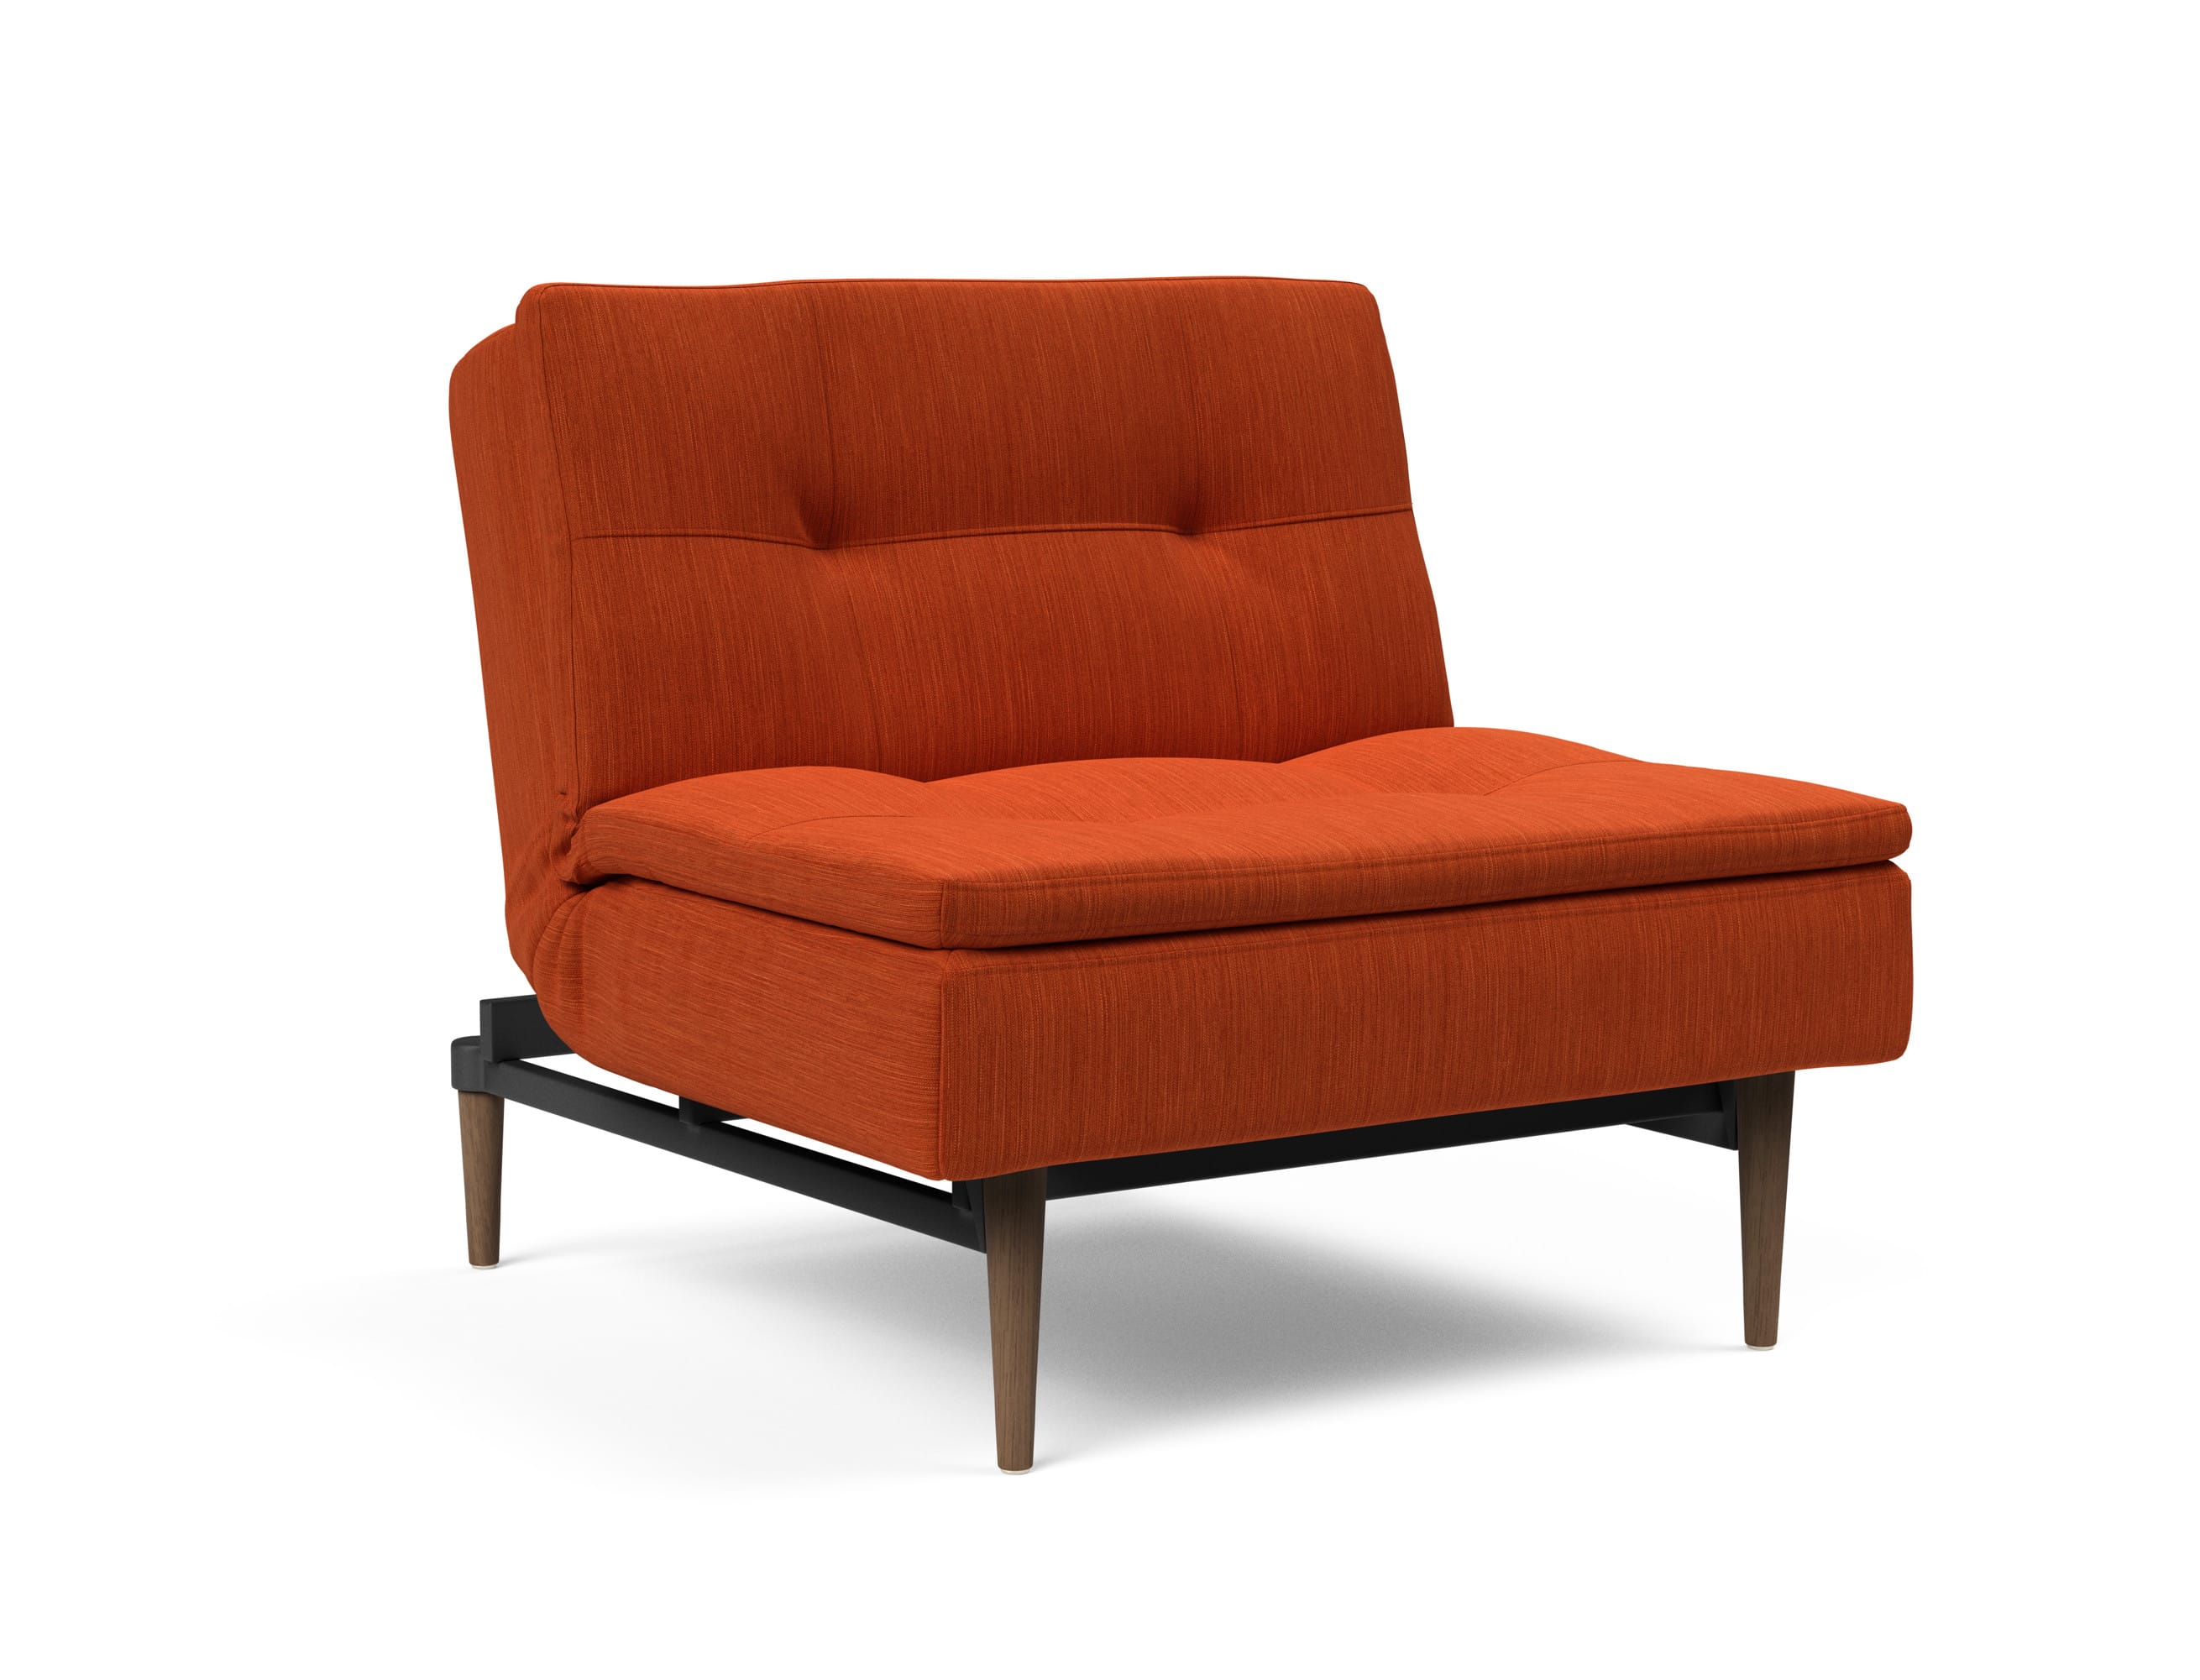 Dublexo Deluxe Chair Elegance Paprika by Innovation